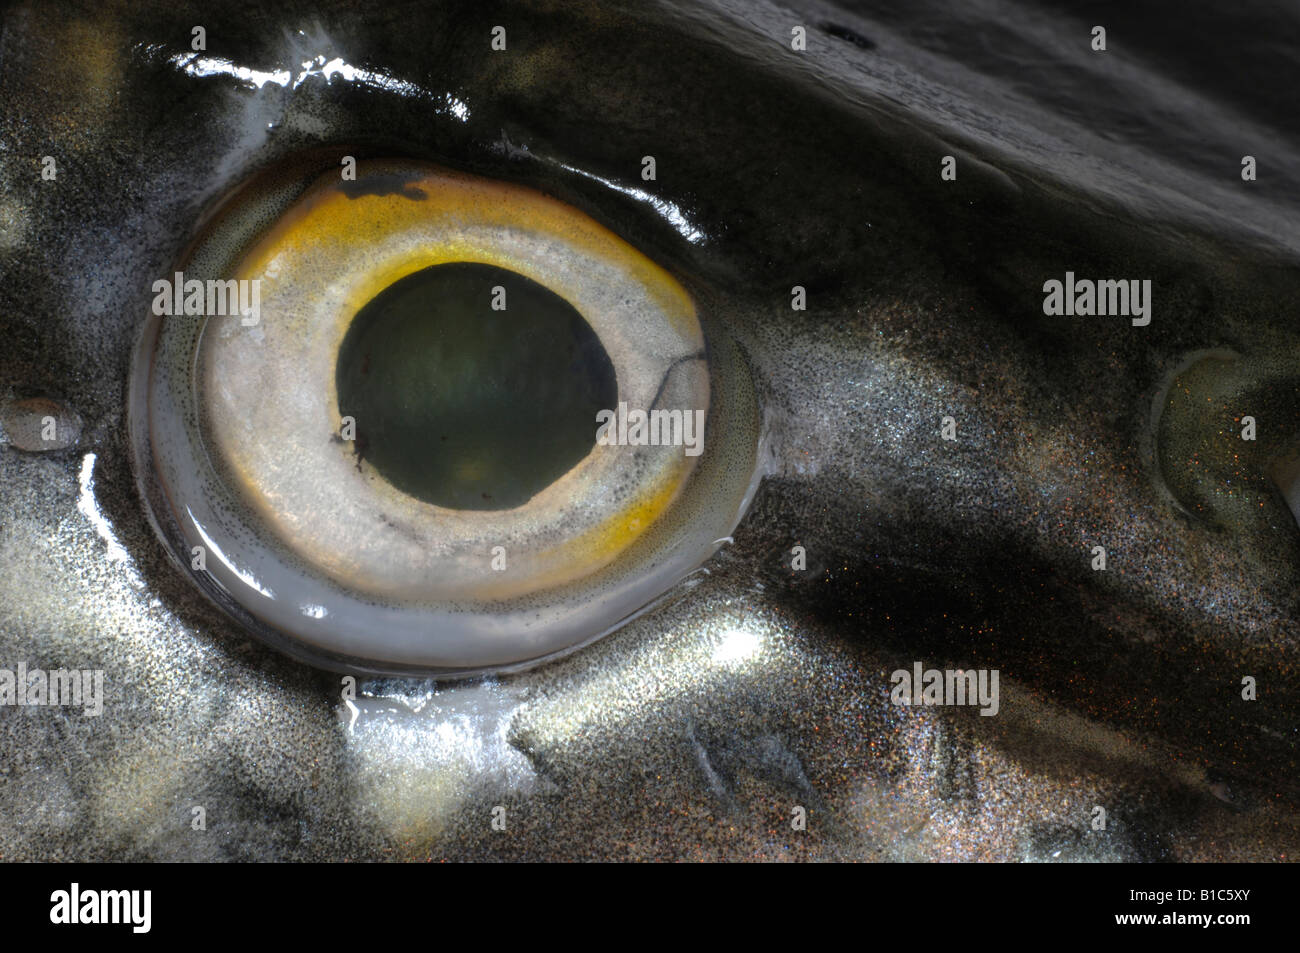 Pike, Northern Pike (Esox lucius), close up of eye Stock Photo